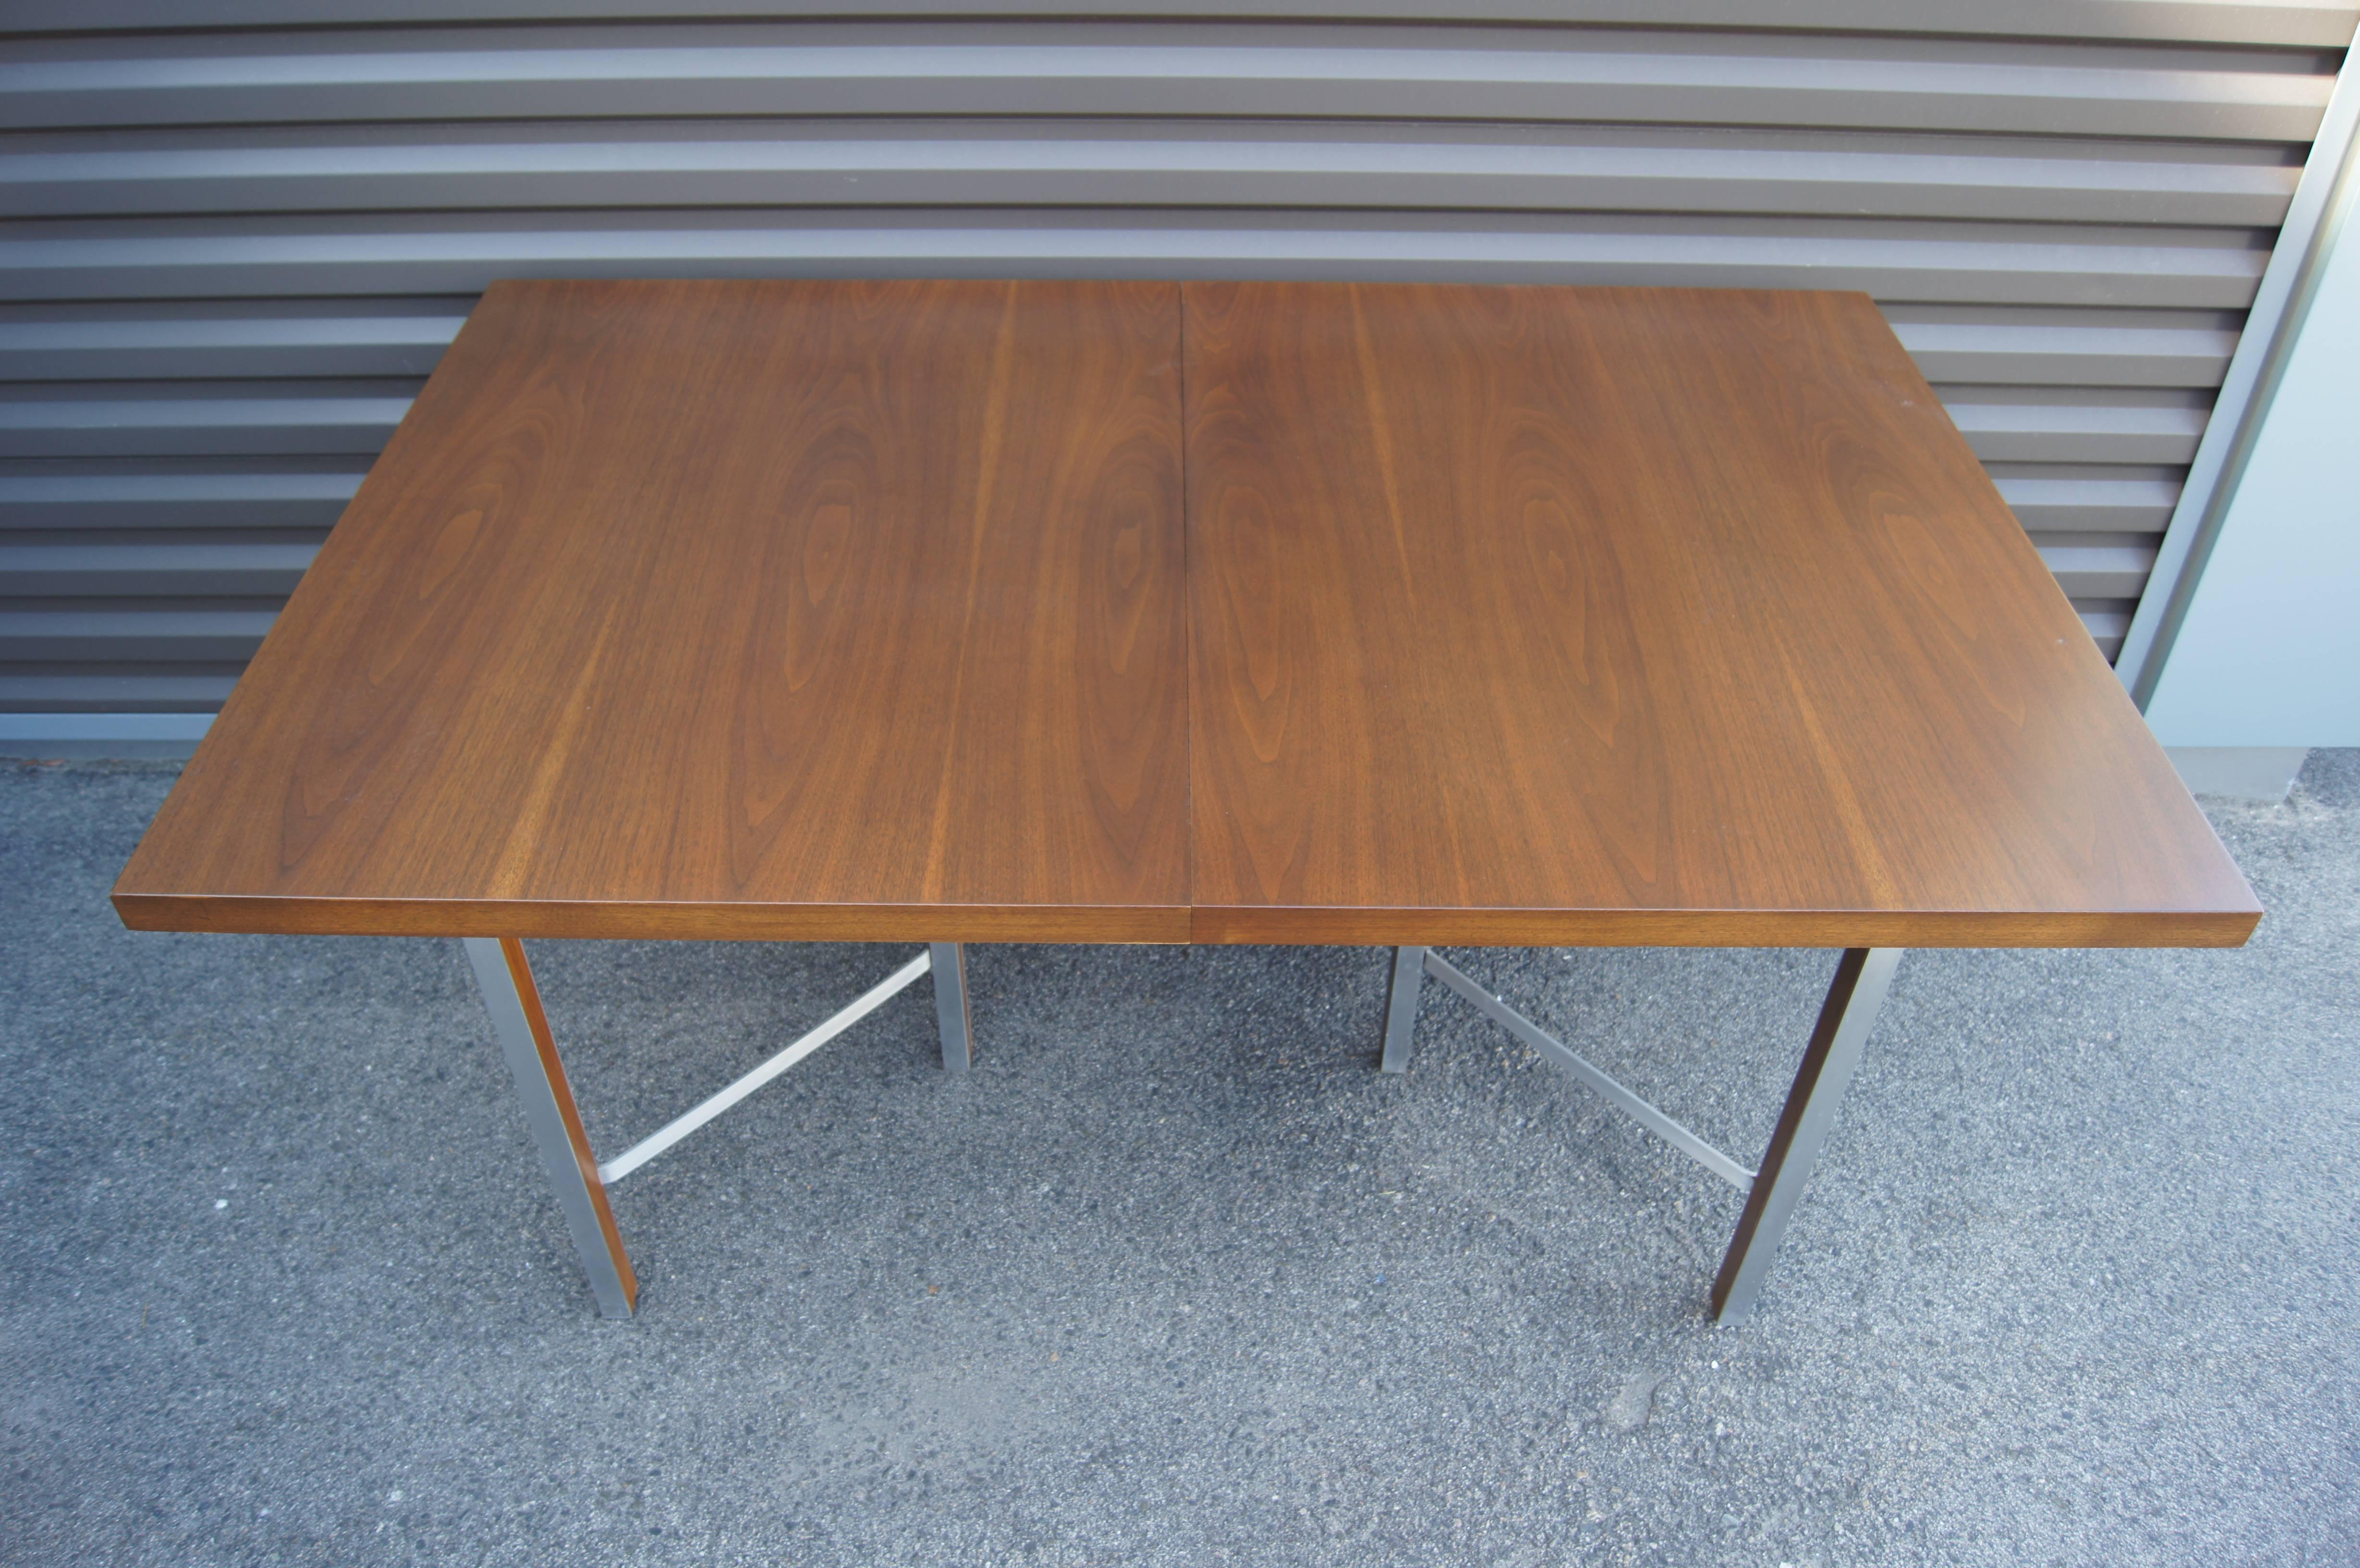 Paul McCobb designed this striking dining table as part of his Irwin Group Collection for Calvin Furniture. The walnut top perches on slim angled aluminium legs. Two 15